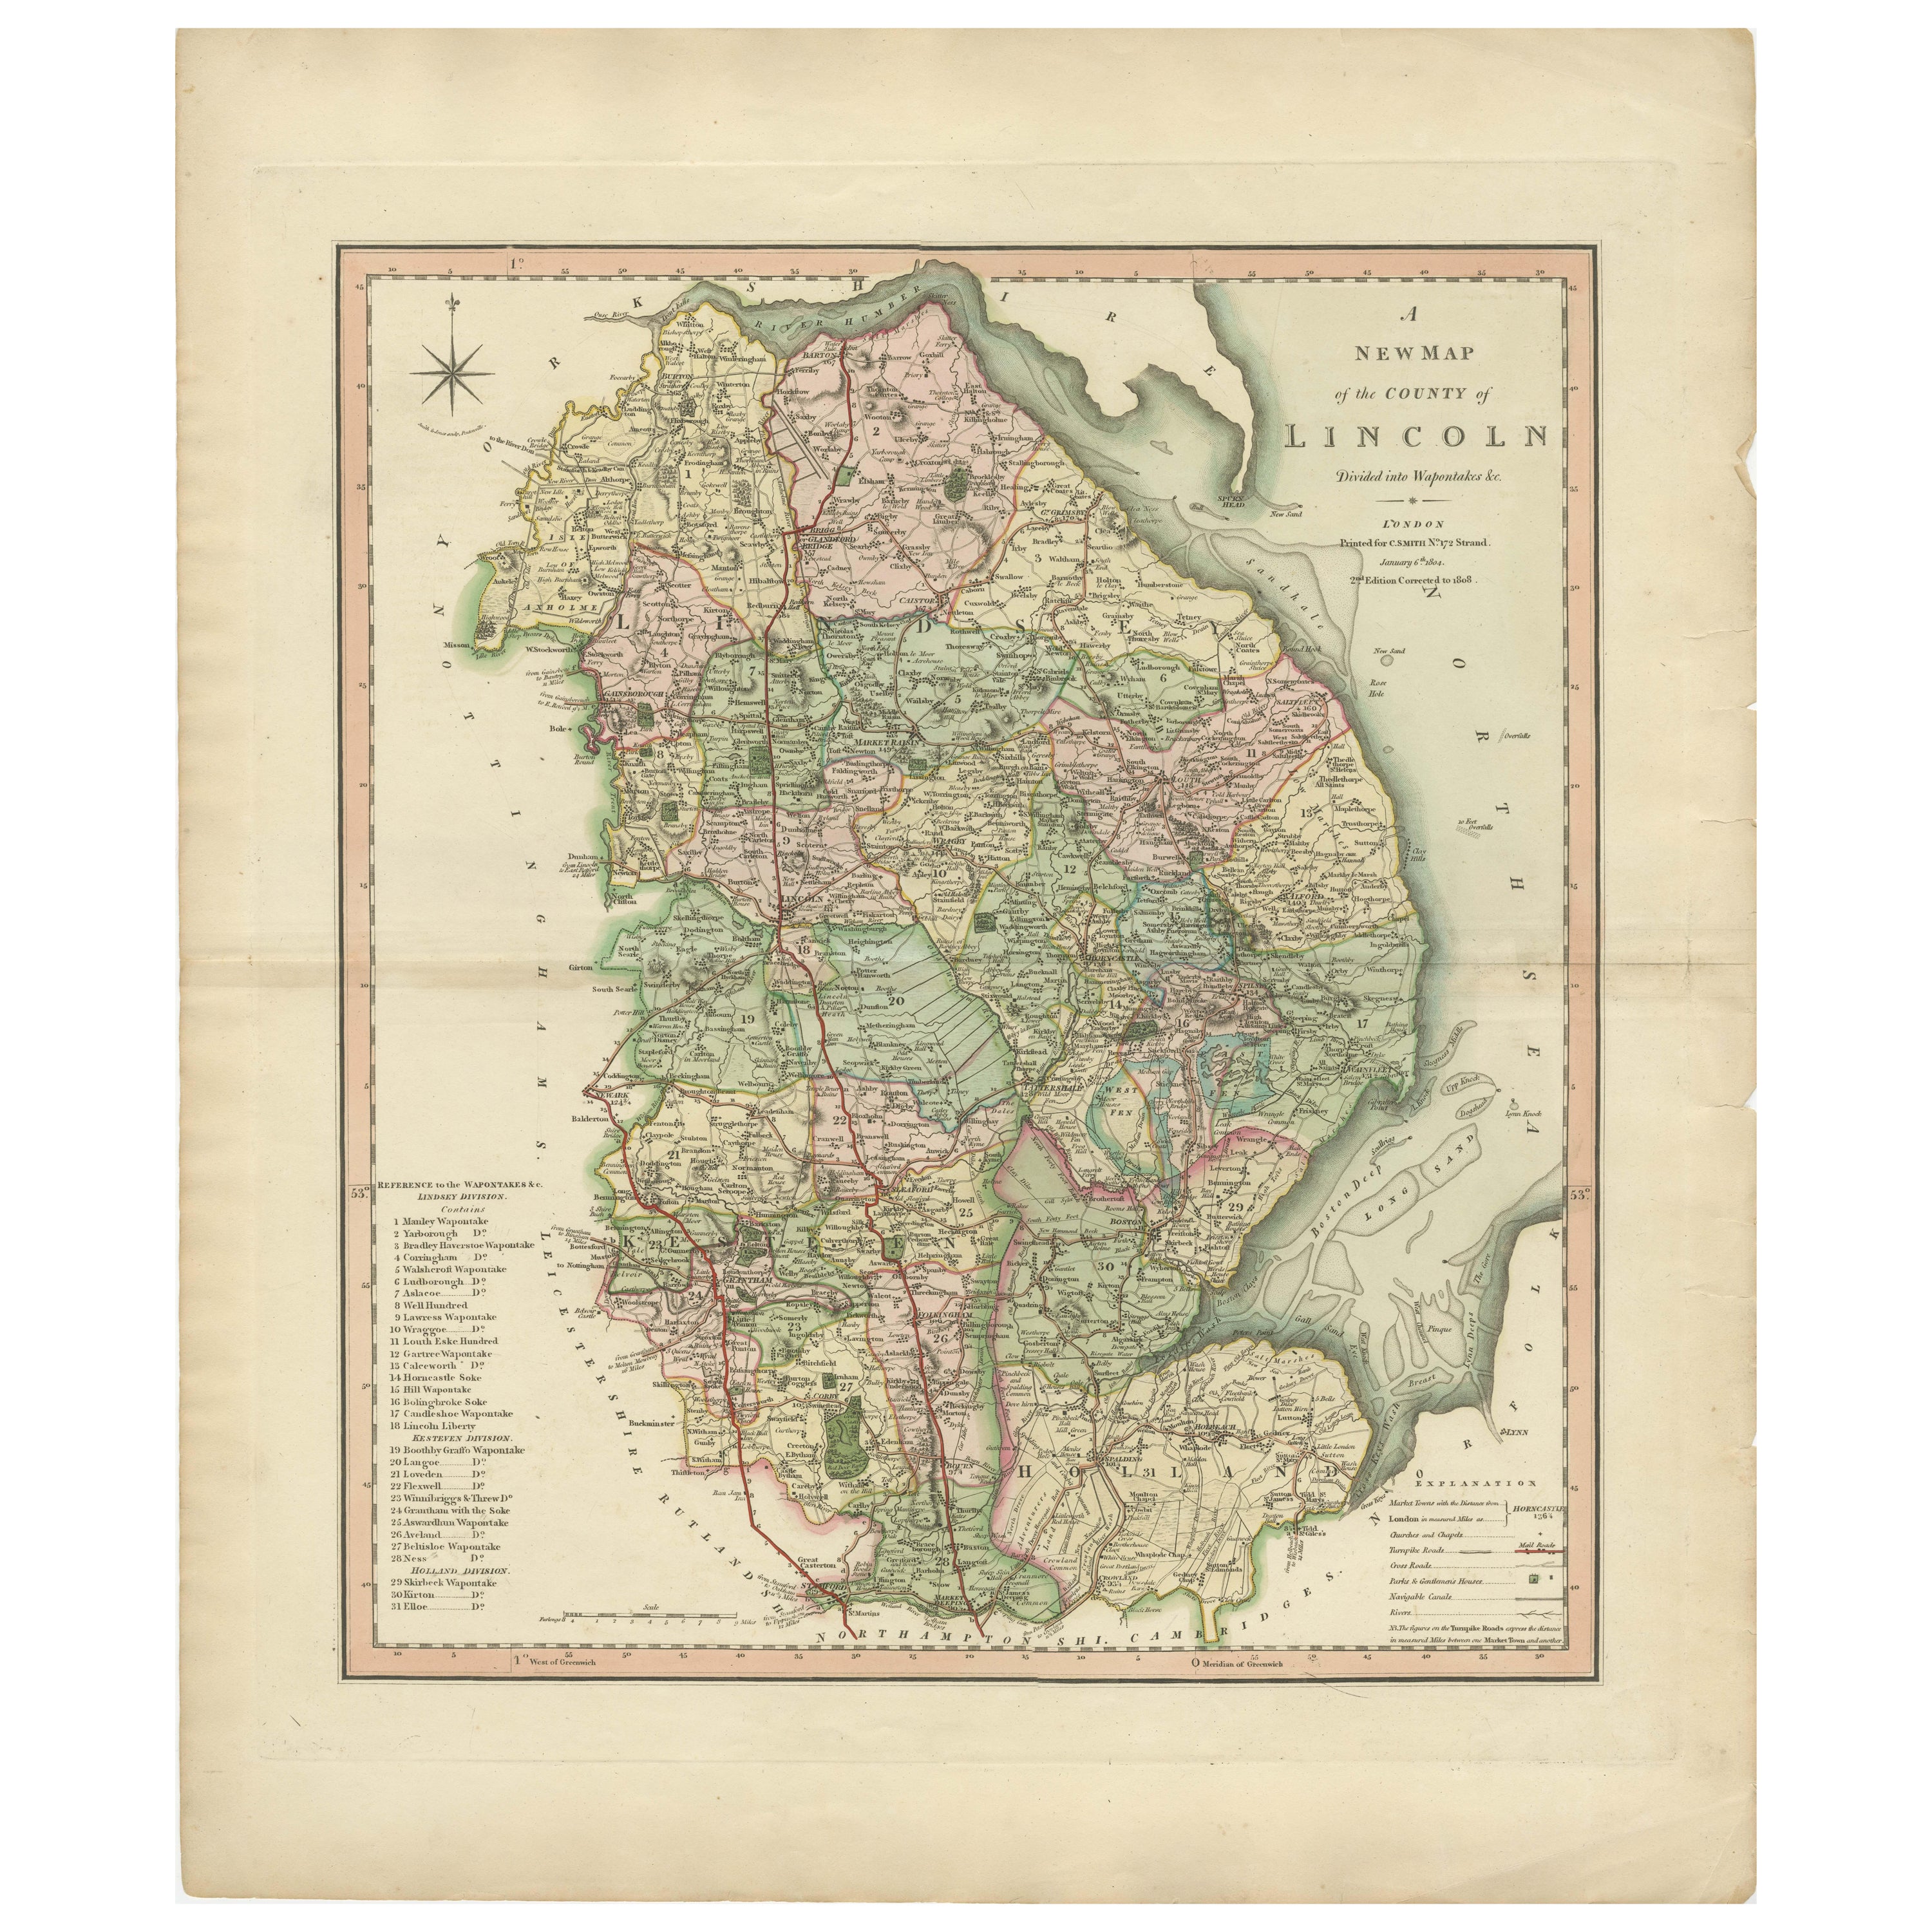 Antique Decorative County Map of Lincolnshire, England, 1804